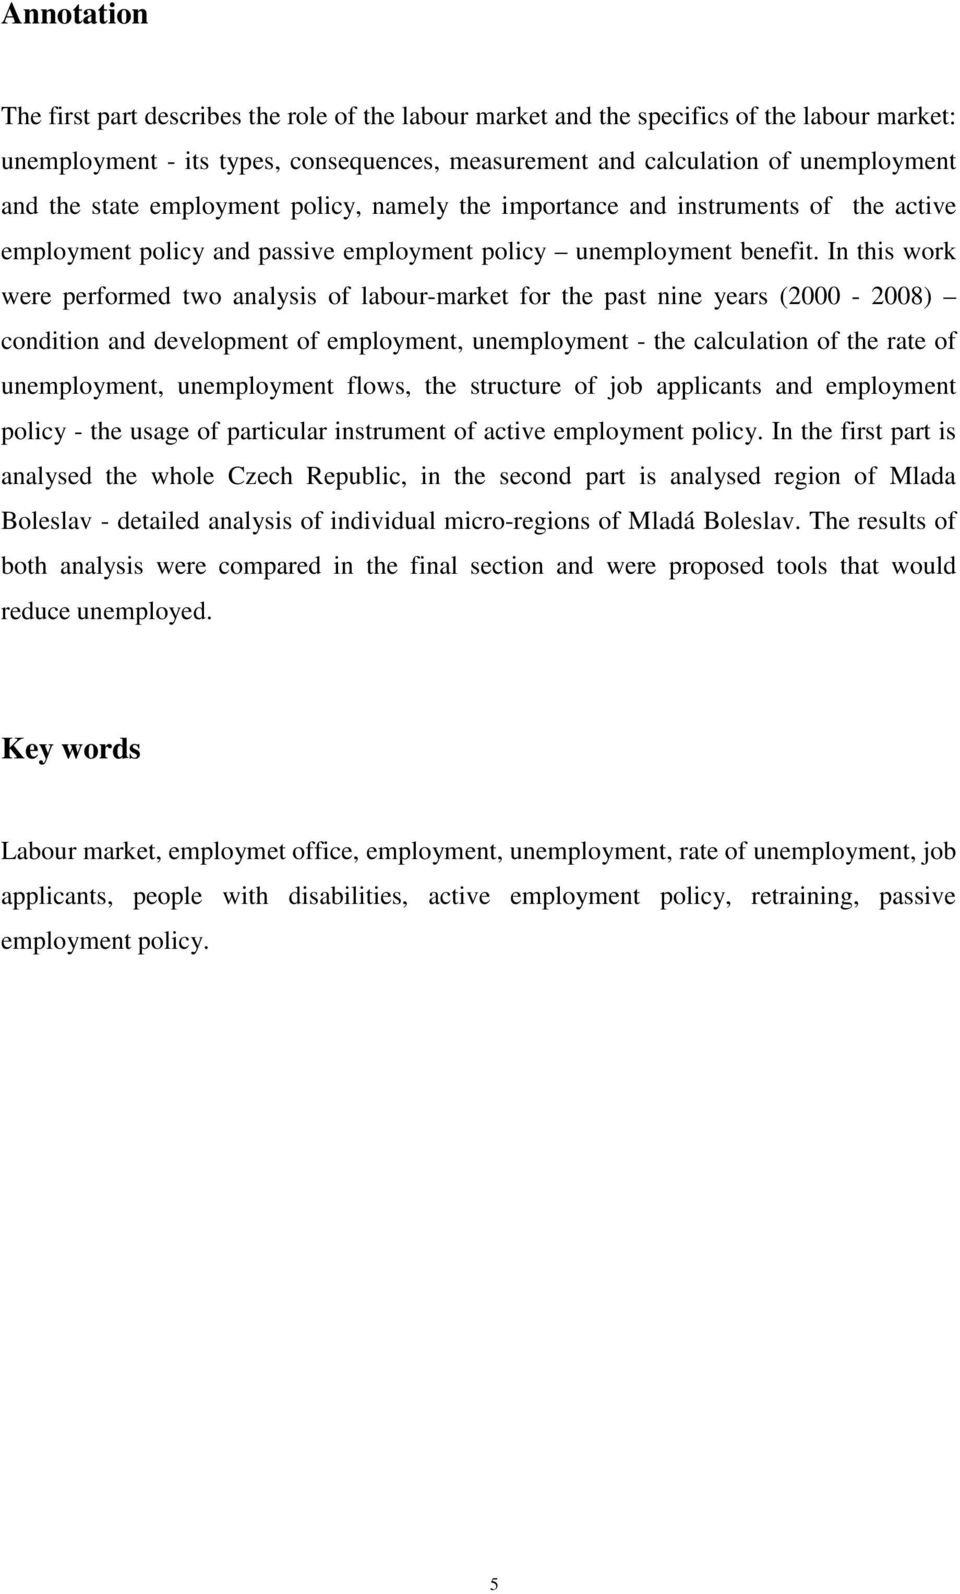 In this work were performed two analysis of labour-market for the past nine years (2000-2008) condition and development of employment, unemployment - the calculation of the rate of unemployment,